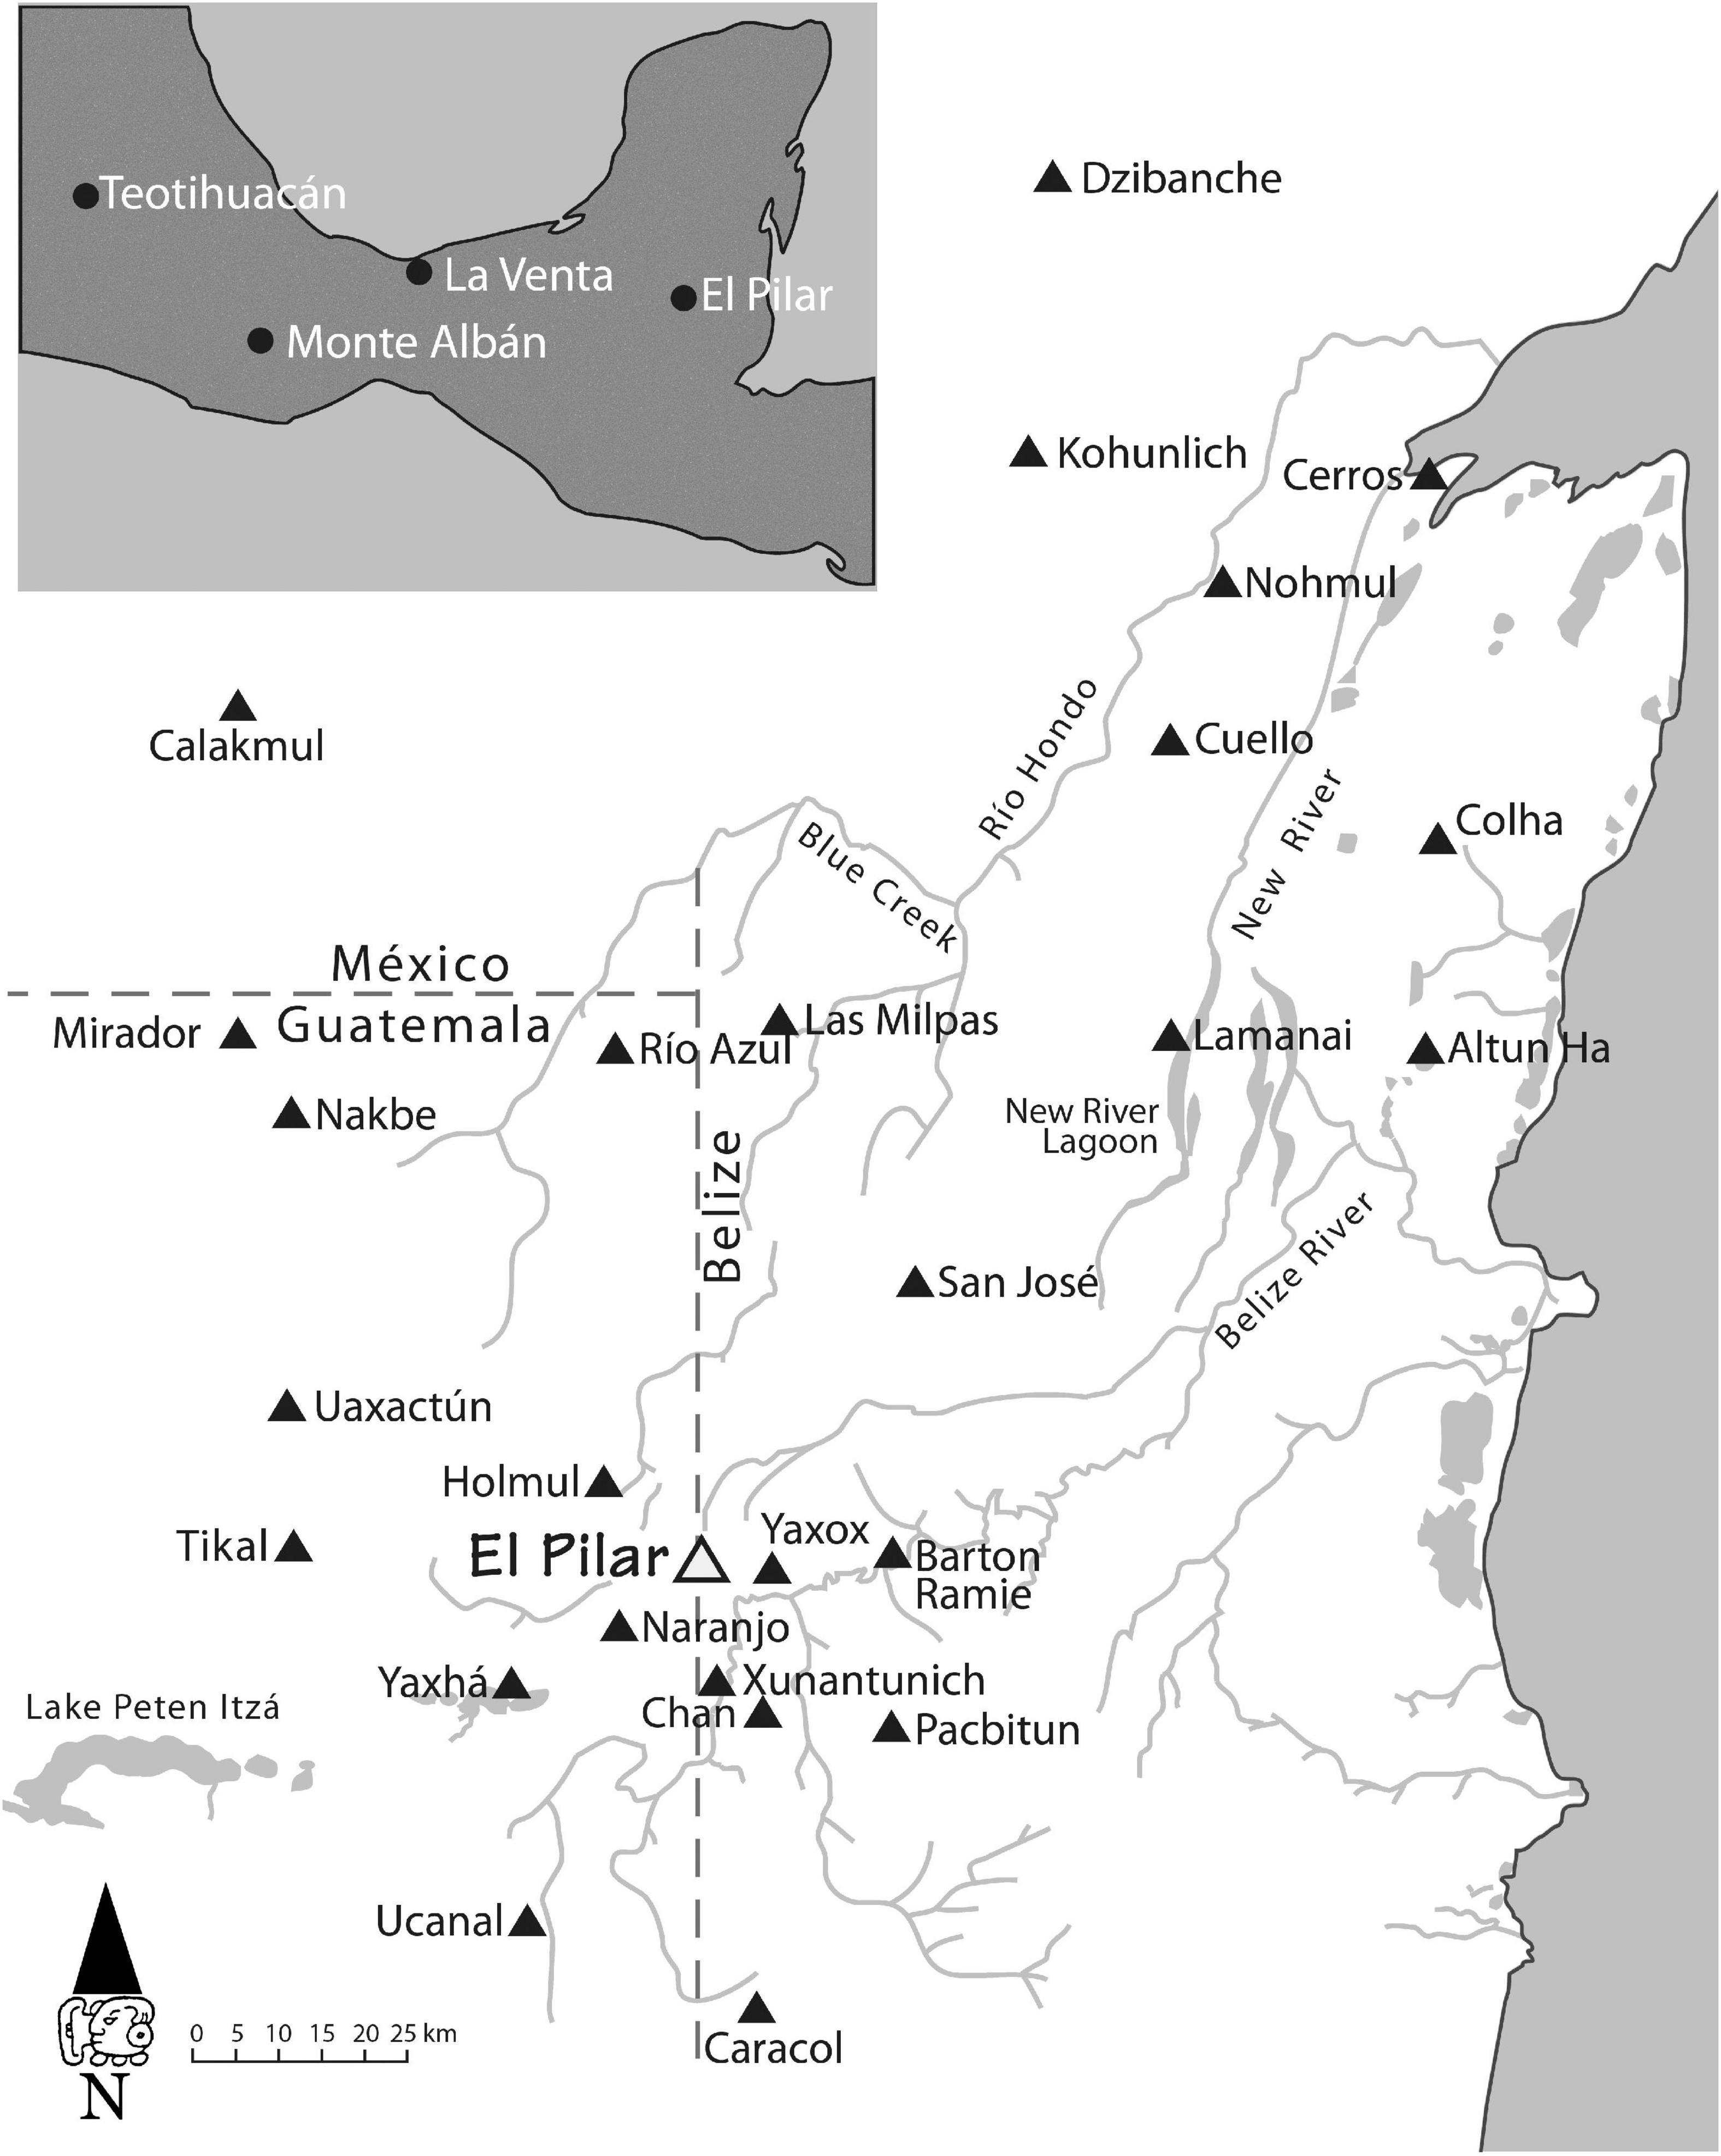 Frontiers  Scrutinizing the paleoecological record of the Maya forest